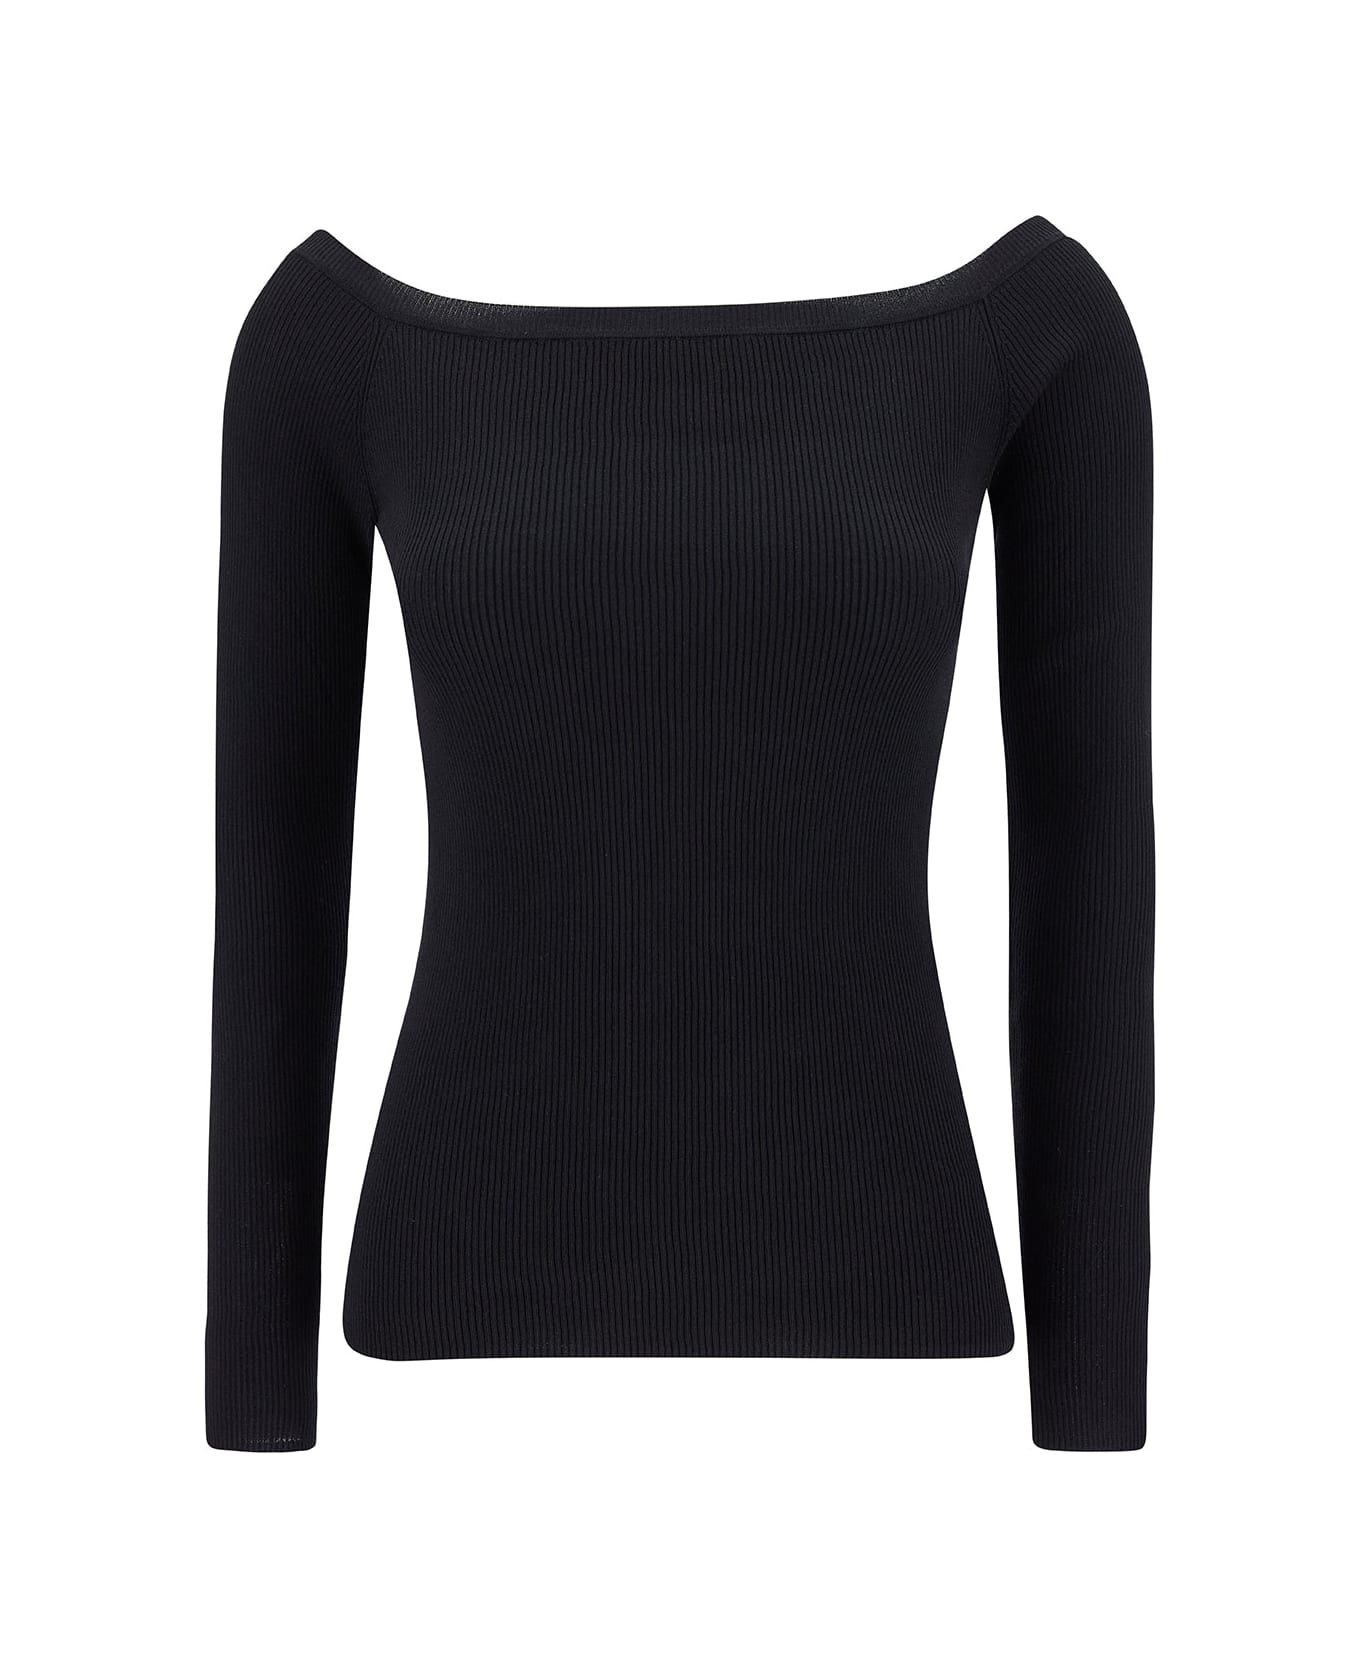 Parosh Black Ribbed Top With Boat Neckline In Cotton Blend Woman - Black